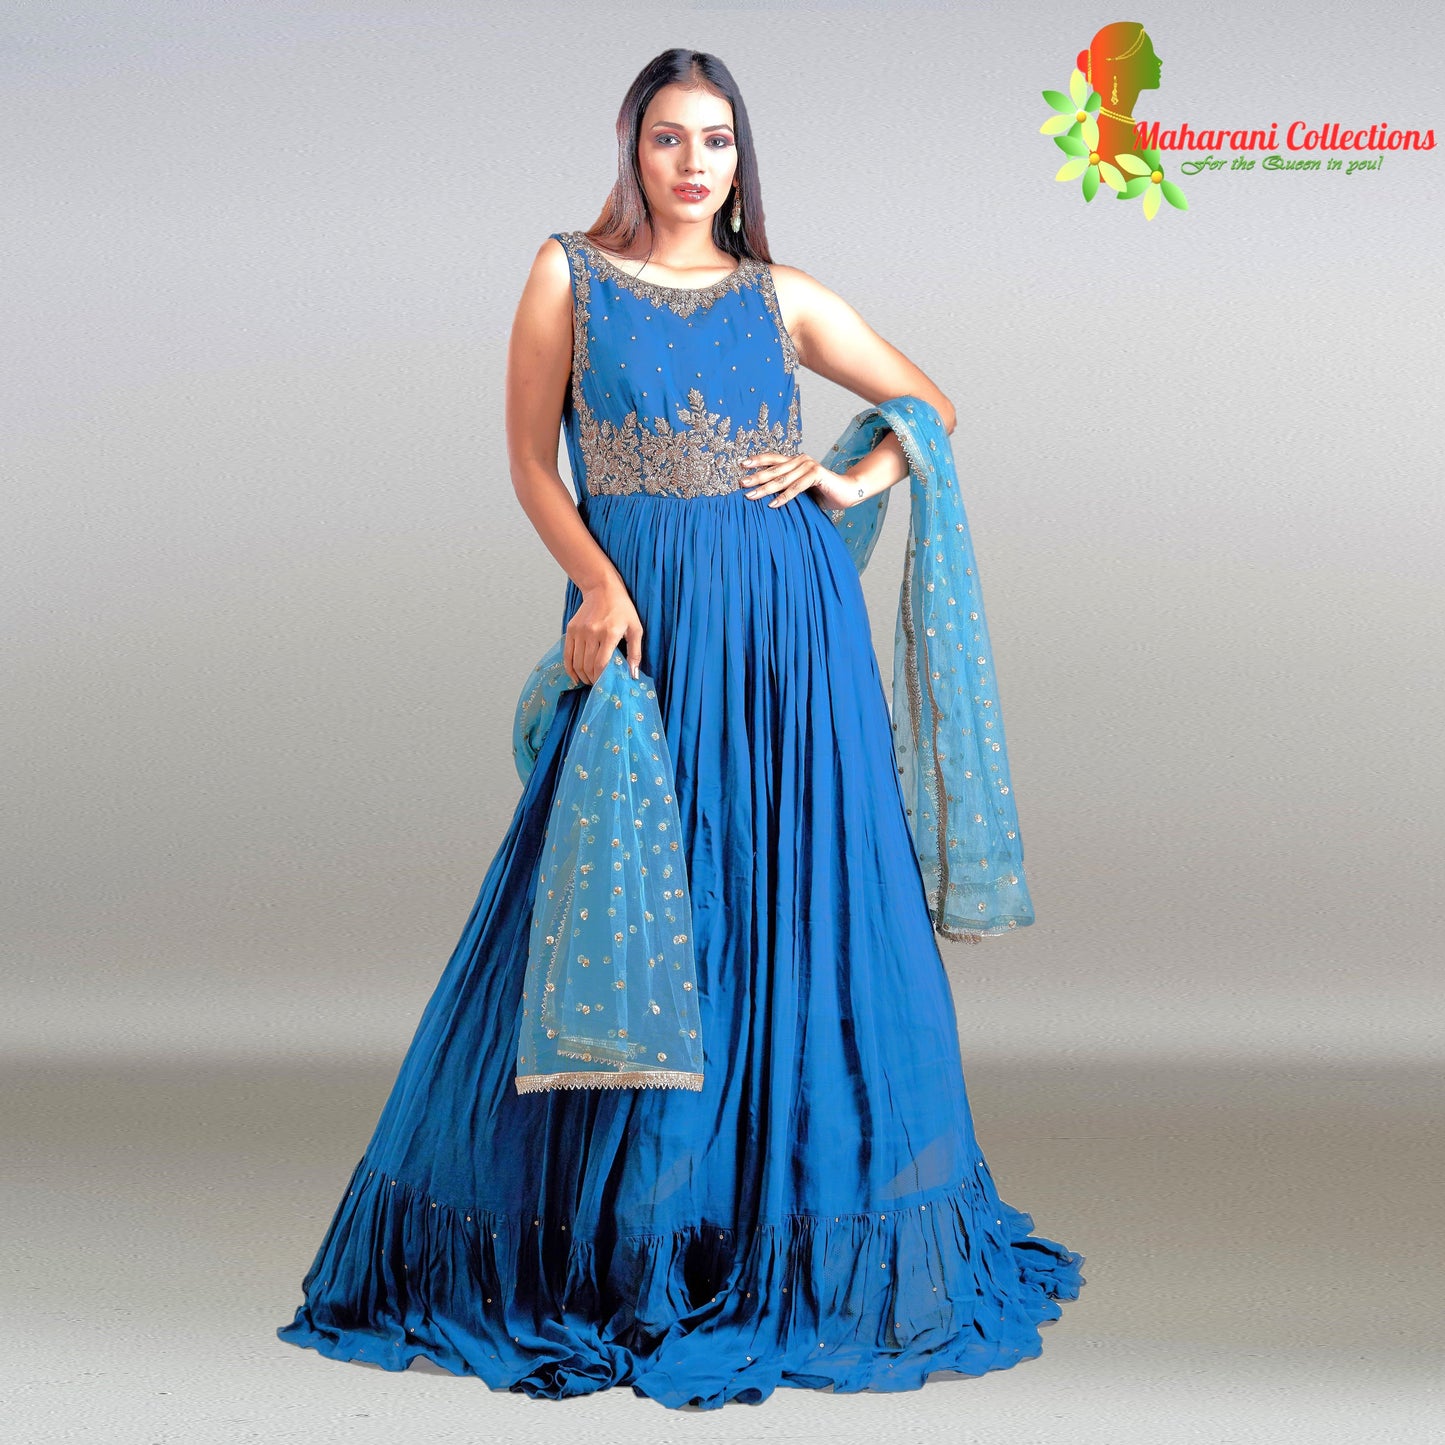 Maharani's Designer Ball (Princess) Gown - Peacock Blue with Heavy Golden Sequins and Zari Work